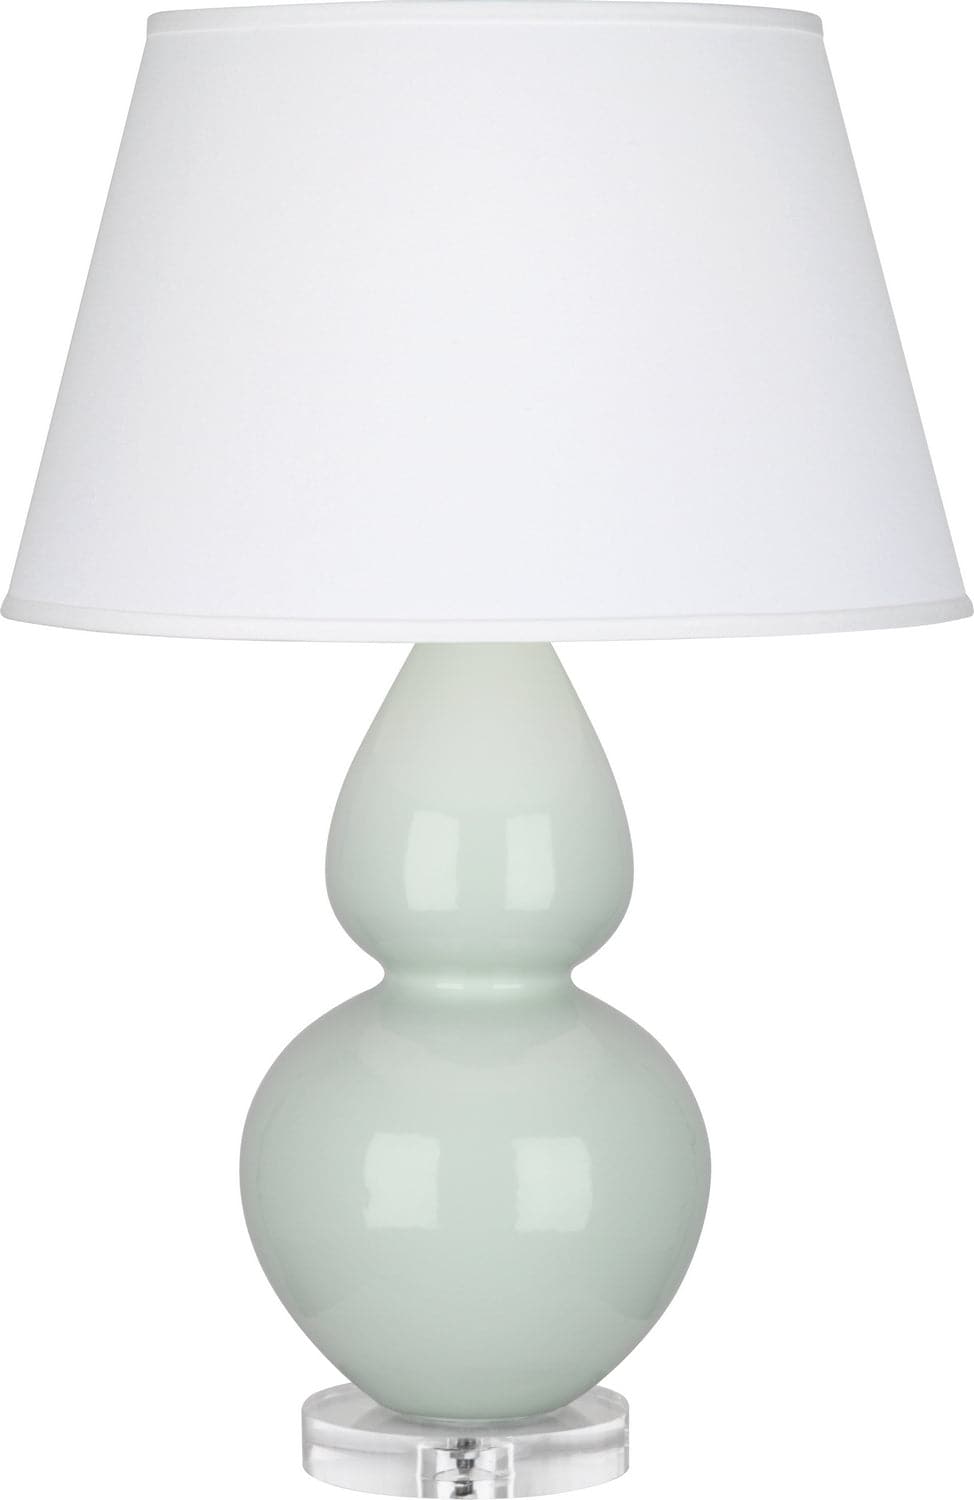 Robert Abbey - A791X - One Light Table Lamp - Double Gourd - Celadon Glazed w/Lucite Base